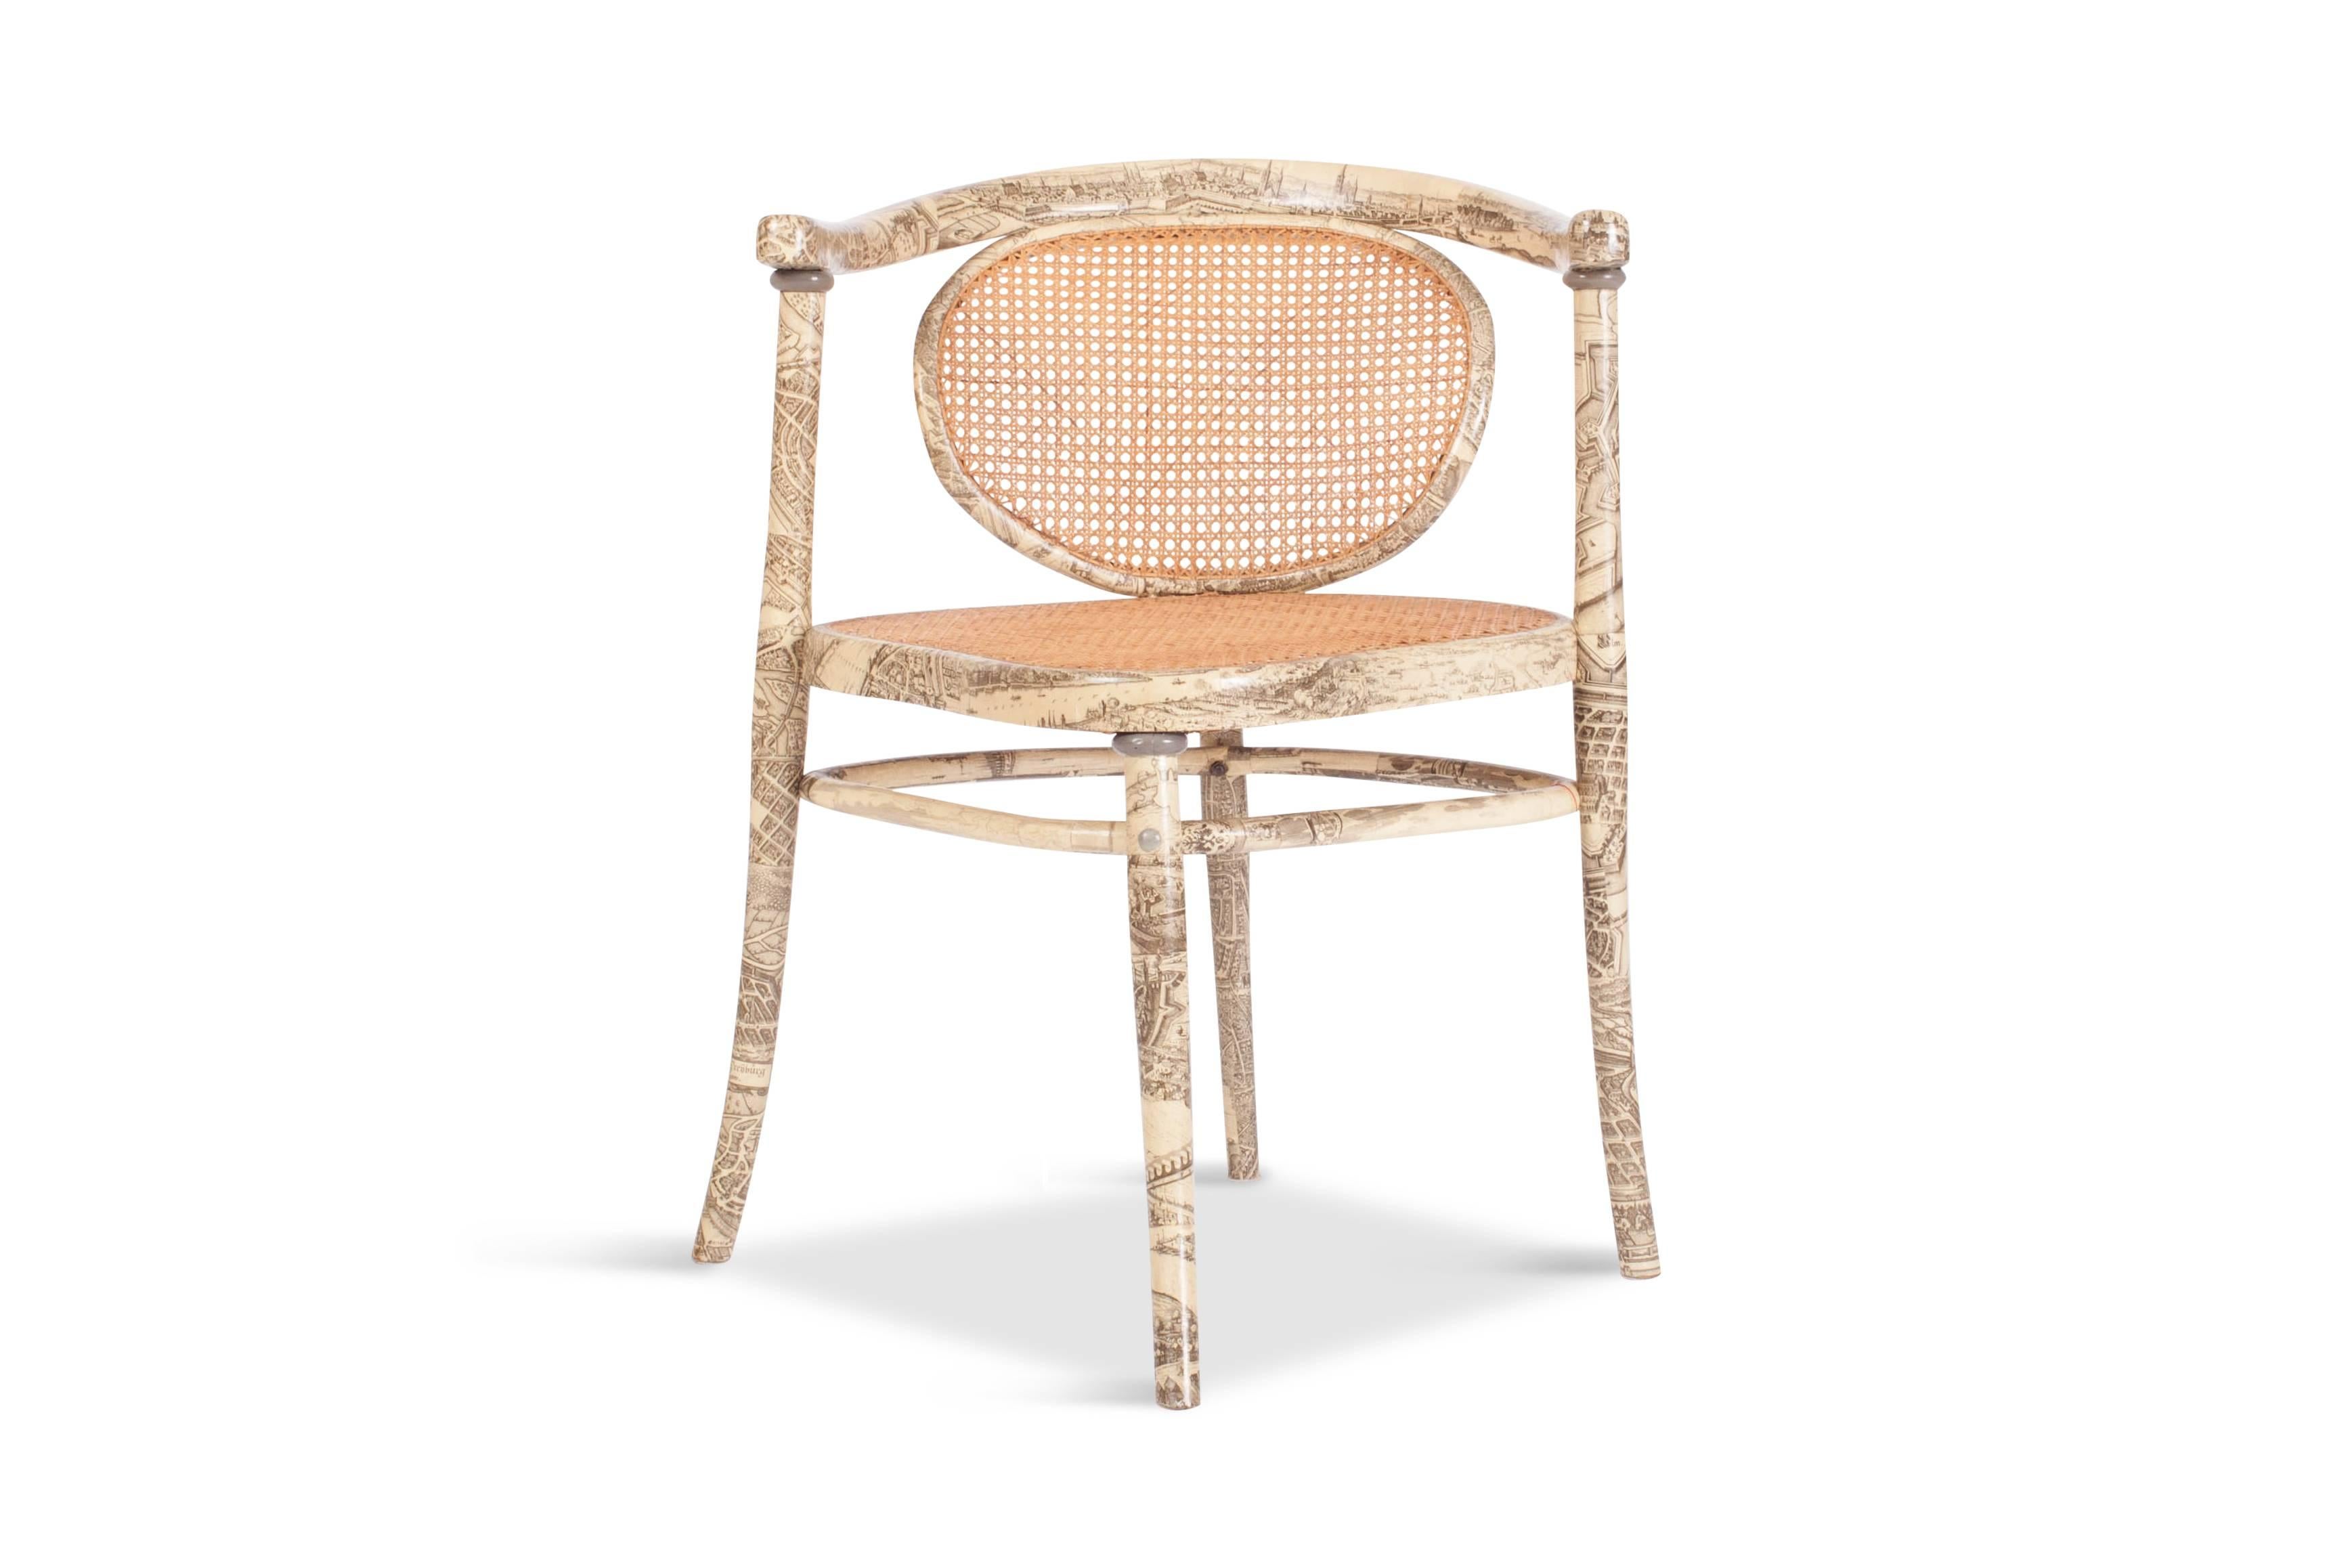 Striking asymmetrical chair by Thonet with saddle shaped seat.

The seat and backrest are weaved in rattan. The rest of the frame is covered in a print
that could have influenced by the great Fornasetti. The chair is marked on the inside of the